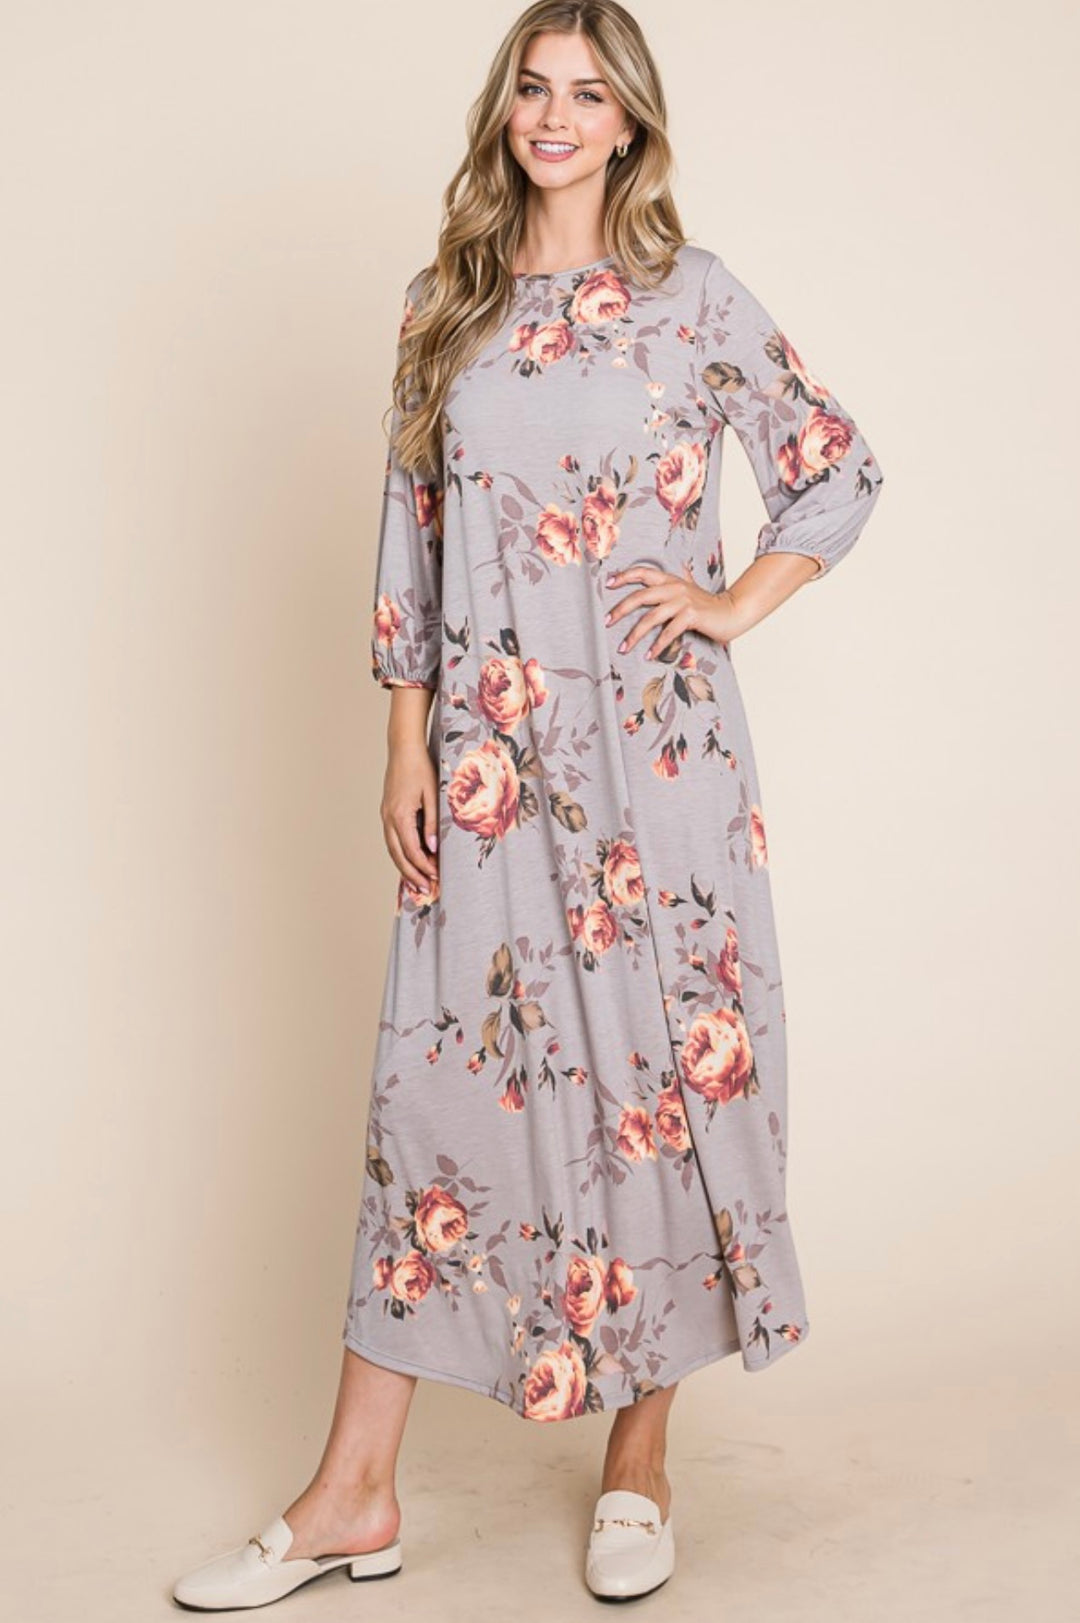 Liza Lou's BomBom Flowy Maxi Colorful Taupe/Gray Floral Dress